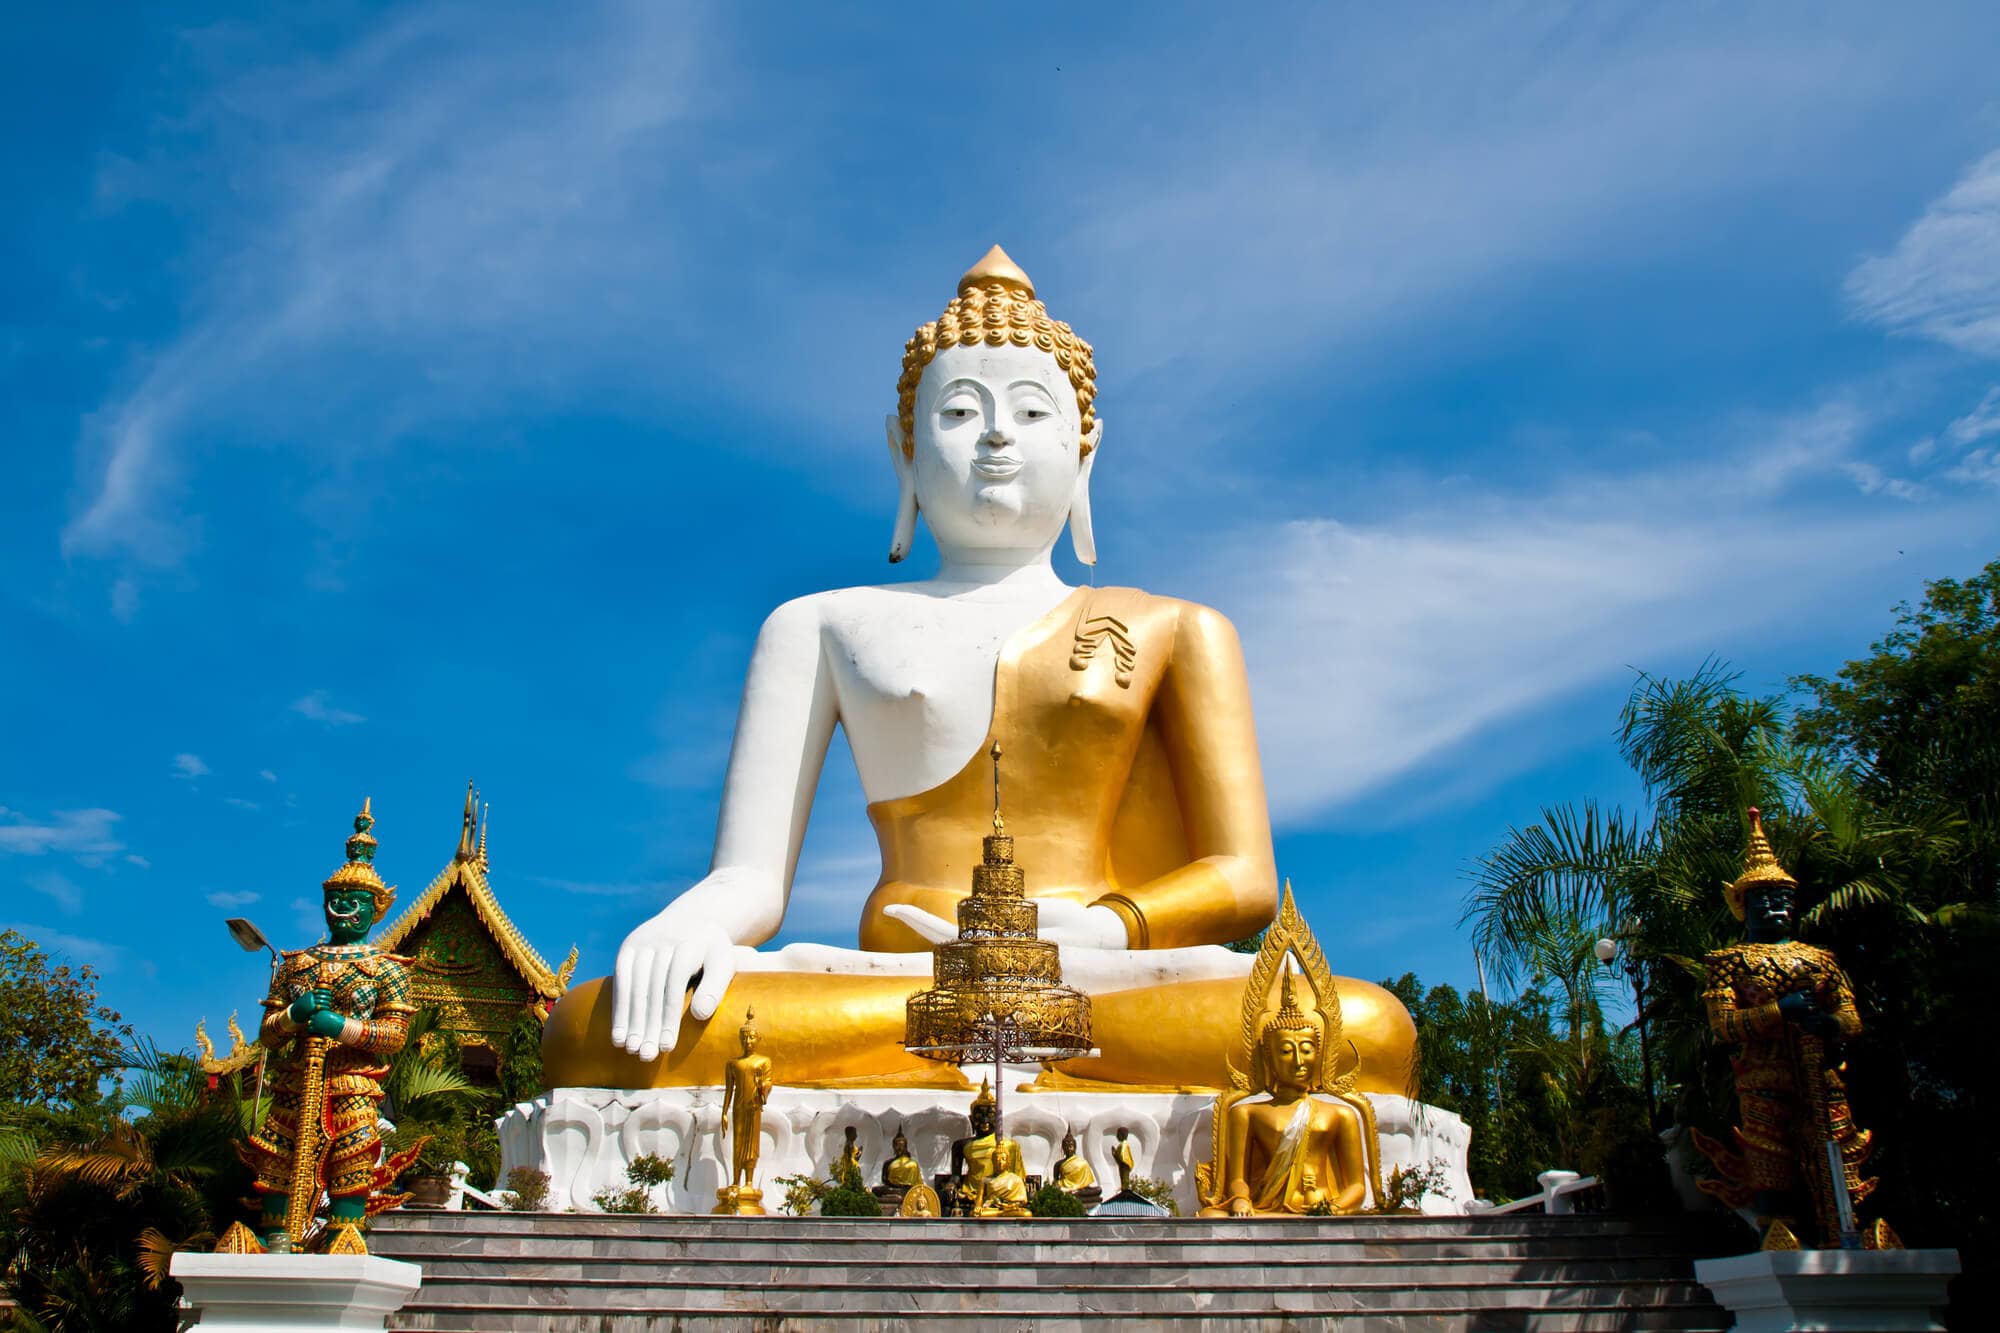 Large white and gold buddha statue with smaller statues in front set against a blue sky at Wat Phra That Doi Kham temple in Chiang Mai.